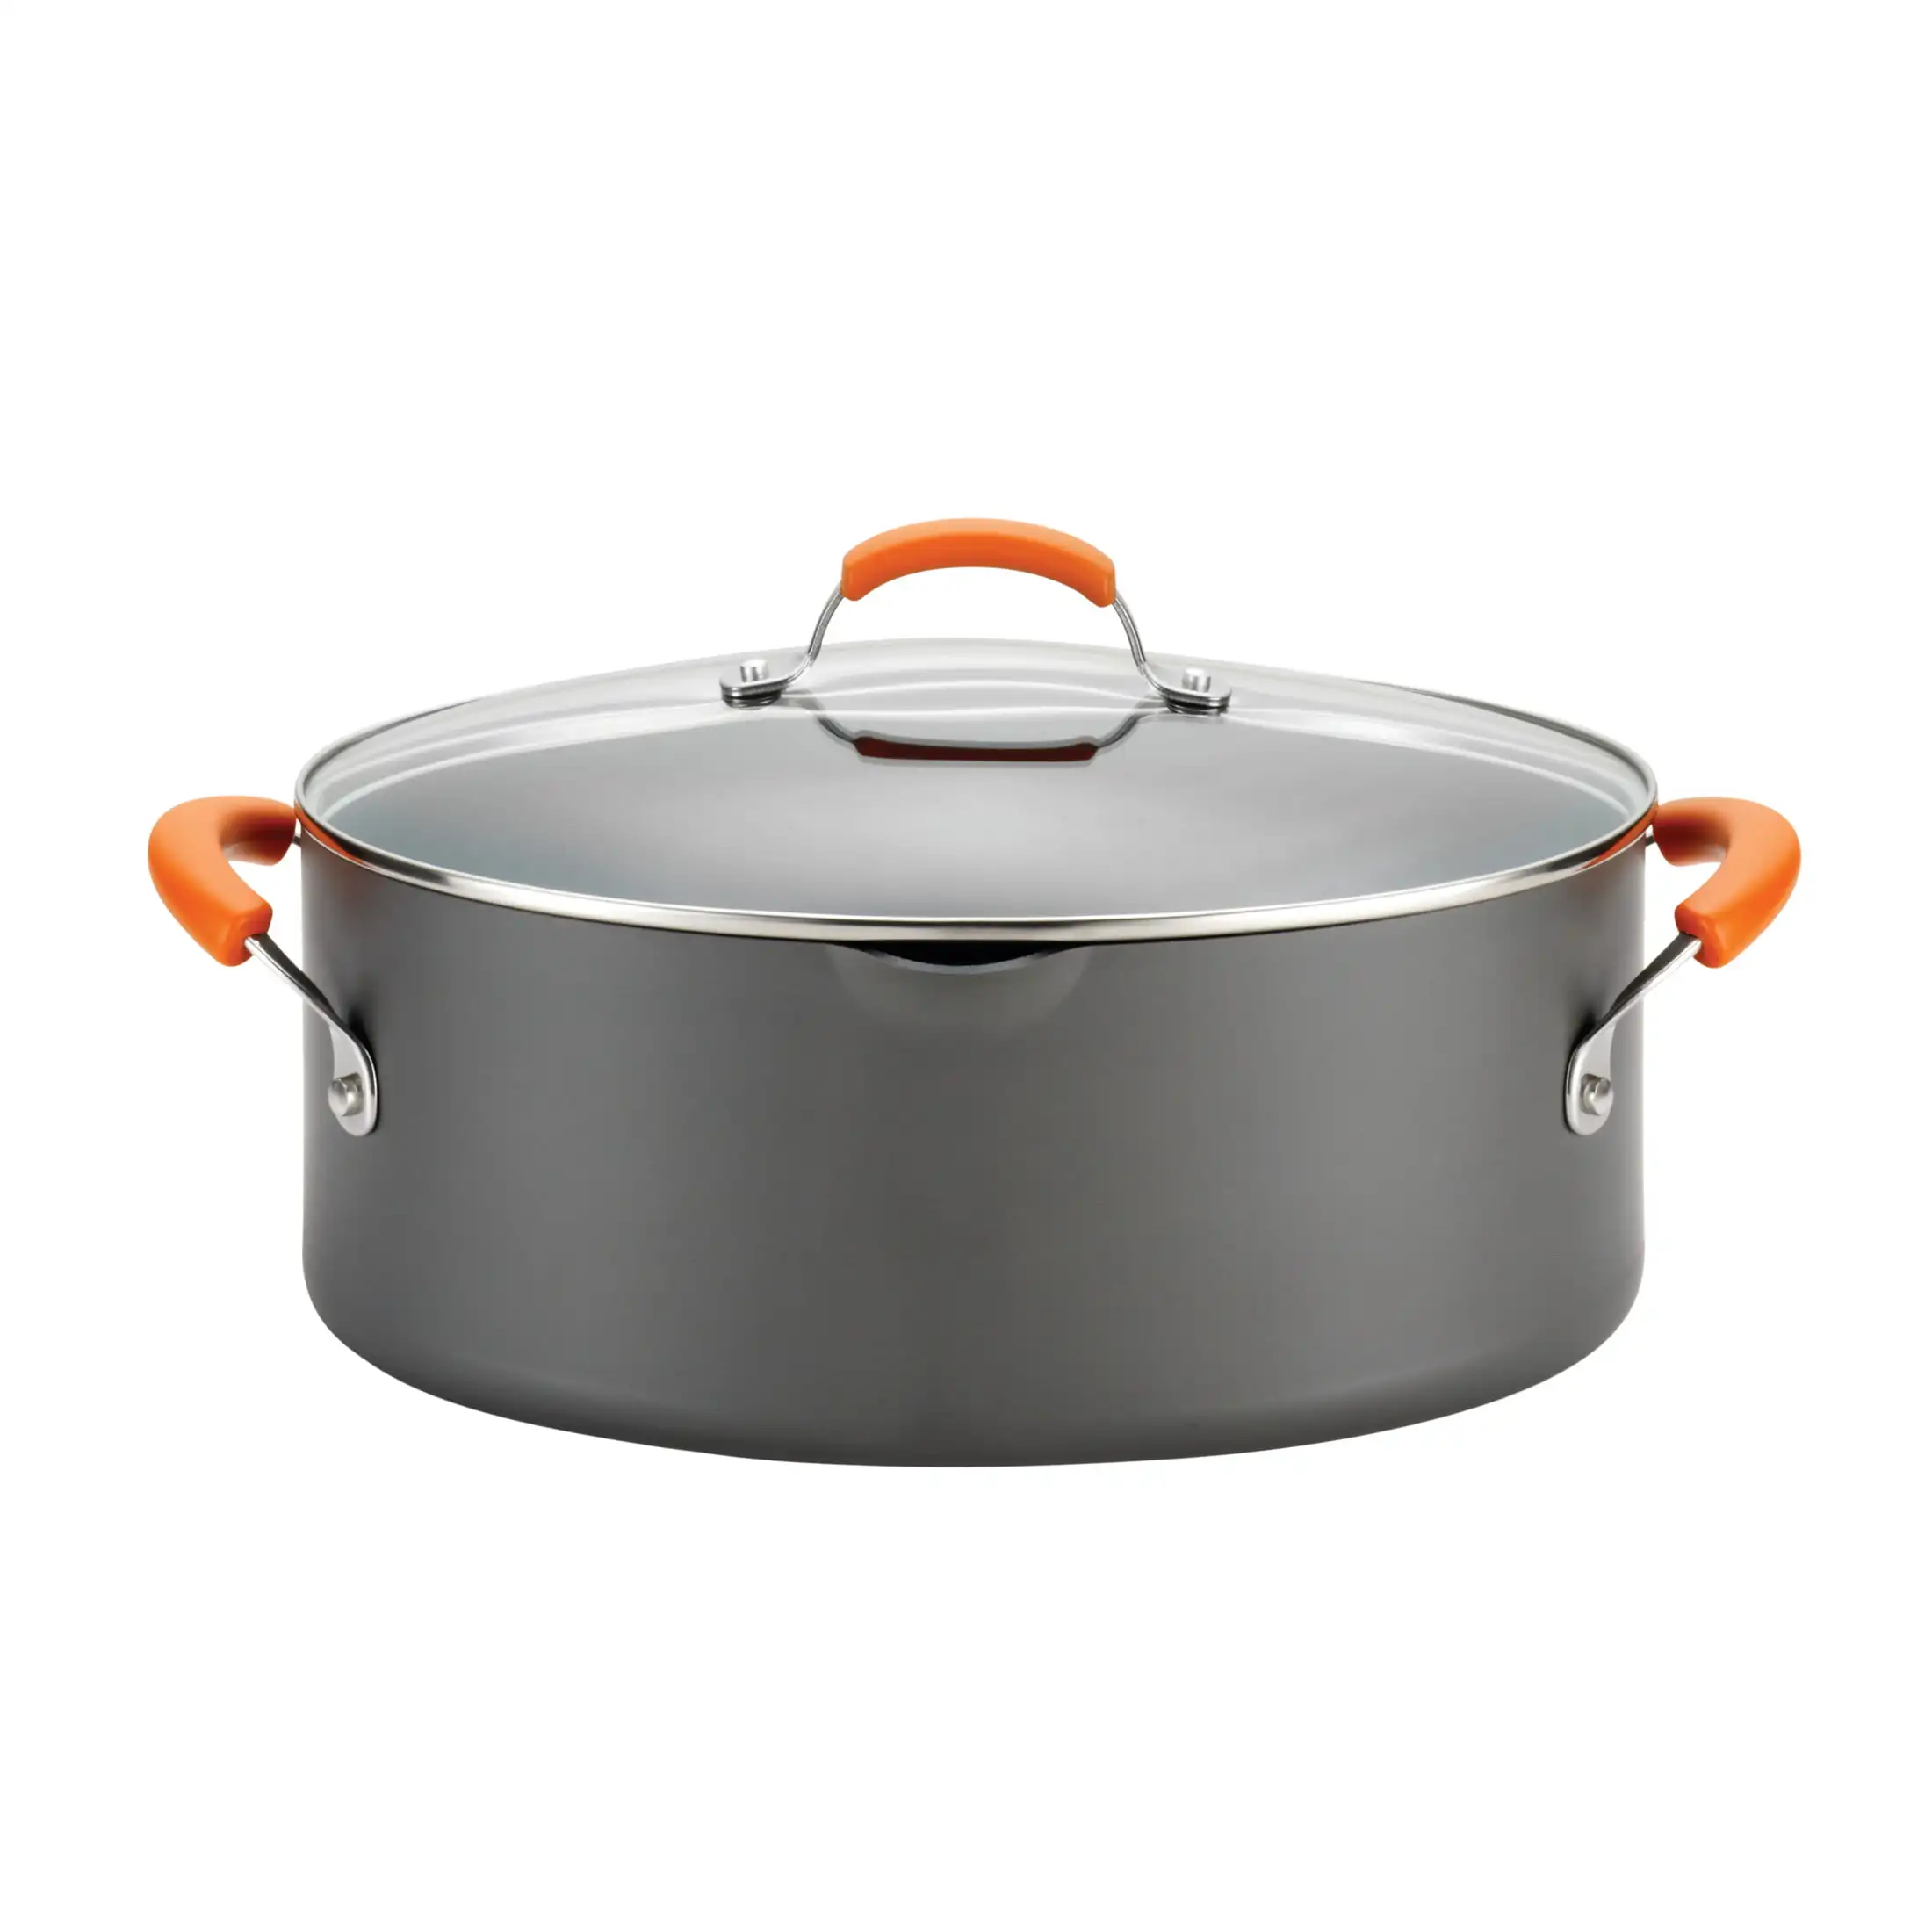 

Rachael Ray Hard-Anodized Nonstick Oval Pasta Pot / Stockpot with Lid and Pour Spout, 8-Quart, Gray Orange Handles